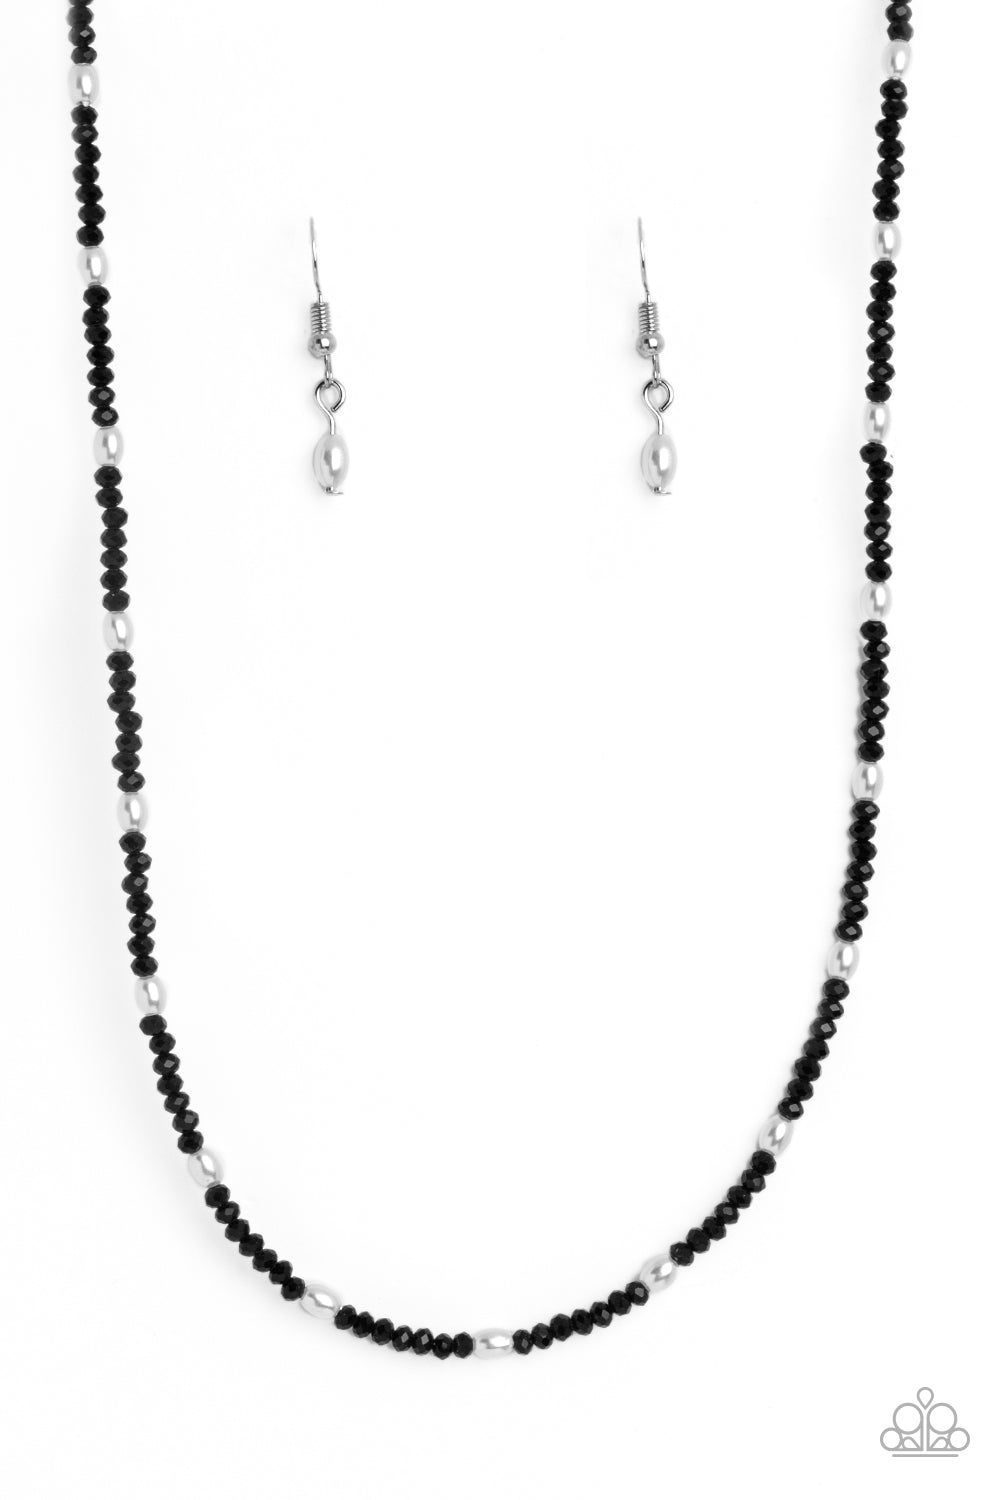 Beaded Blitz Black Seed Bead Necklace - Paparazzi Accessories  A dainty row of faceted black crystal-like seed beads delicately links around the neck, resulting in a radiant glimmer. Dainty white, oval pearls infused along the neckline create additional refinement and charm to the design. Features an adjustable clasp closure.  Sold as one individual necklace. Includes one pair of matching earrings.  P2DA-BKXX-179XX